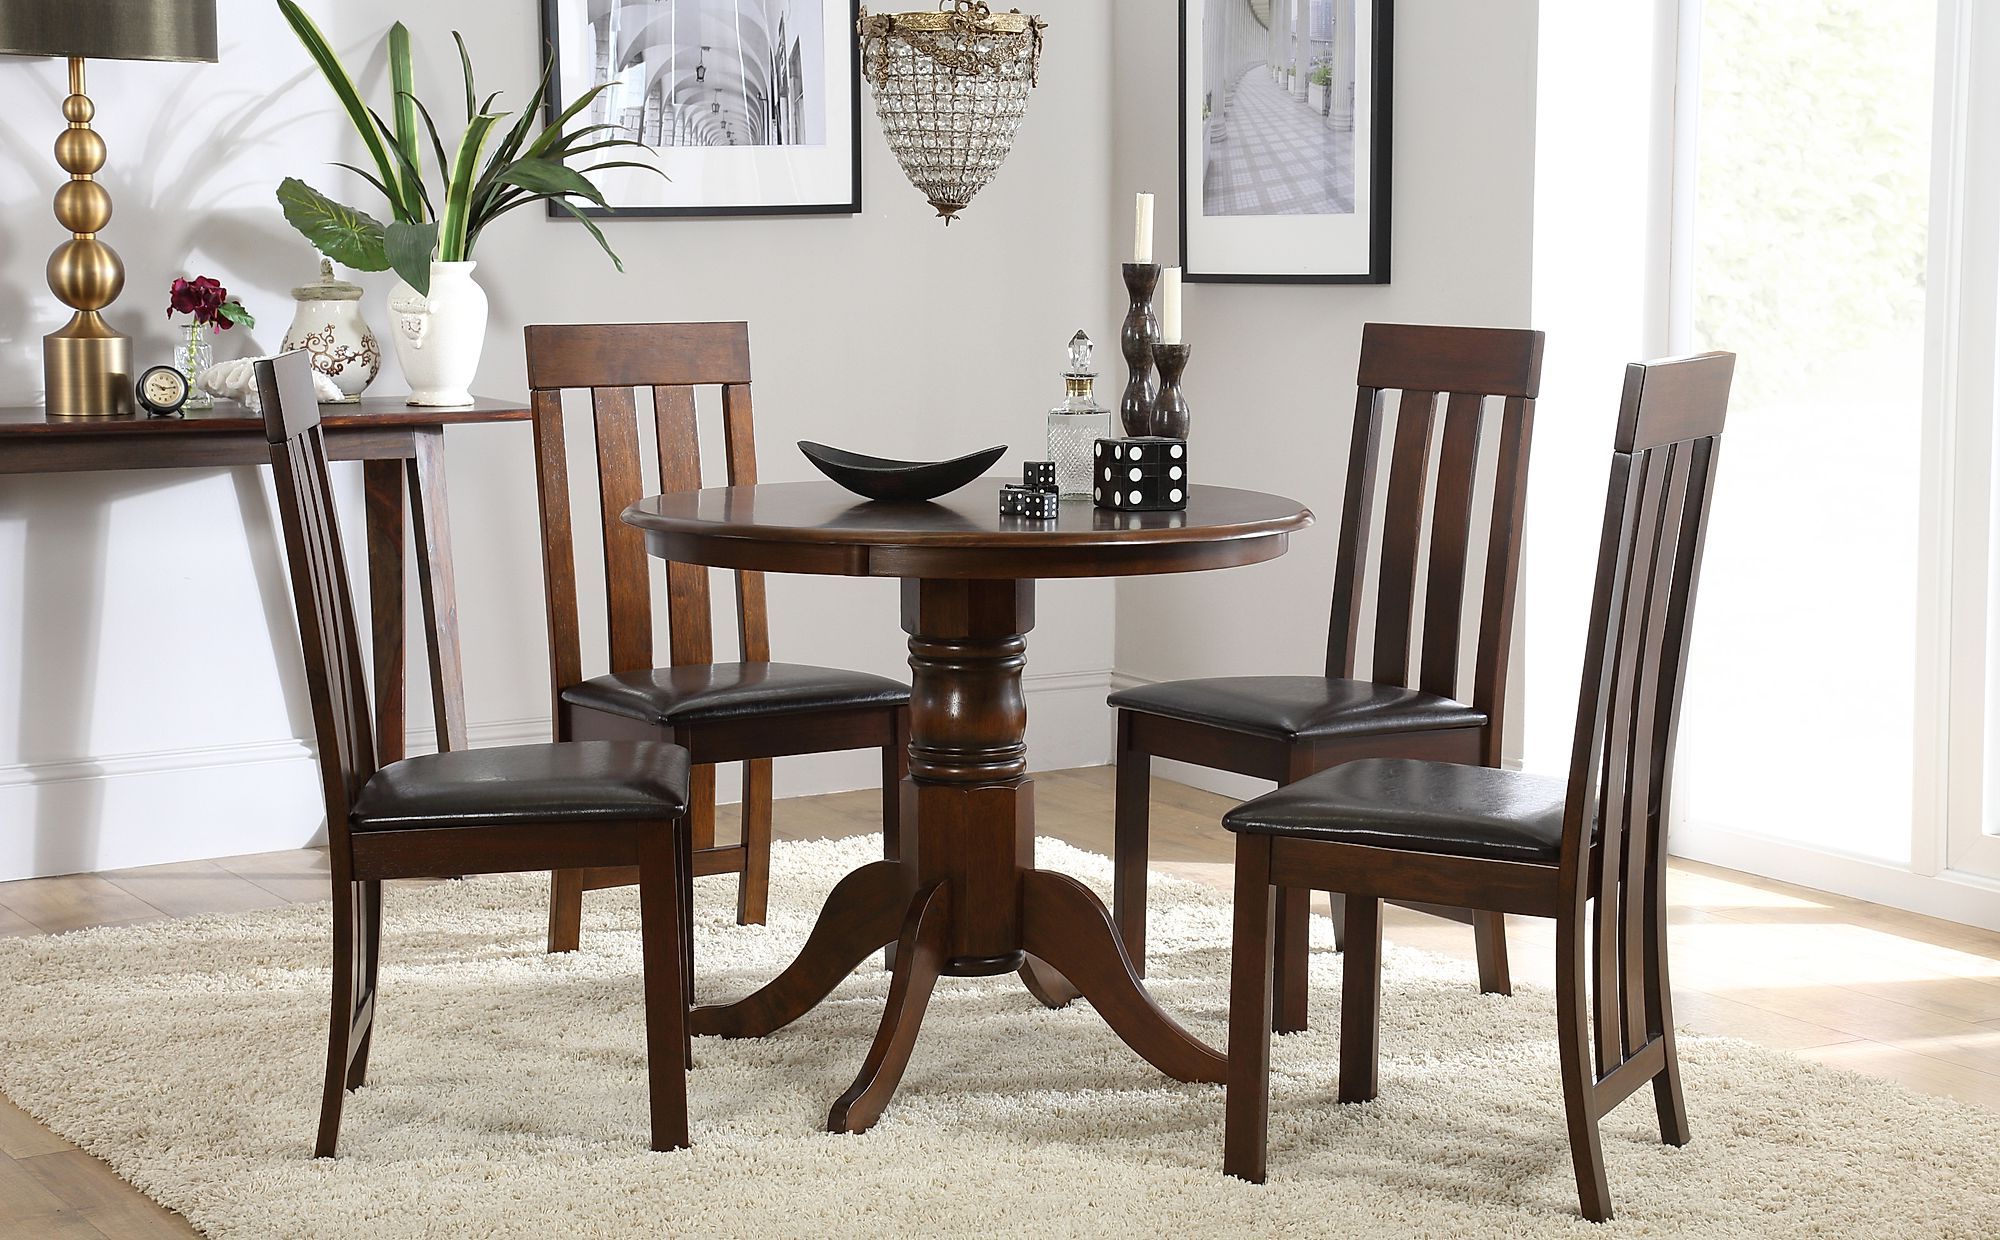 Kingston Round Dark Wood Dining Table With 4 Chester Throughout Most Current Dark Brown Round Dining Tables (View 2 of 20)